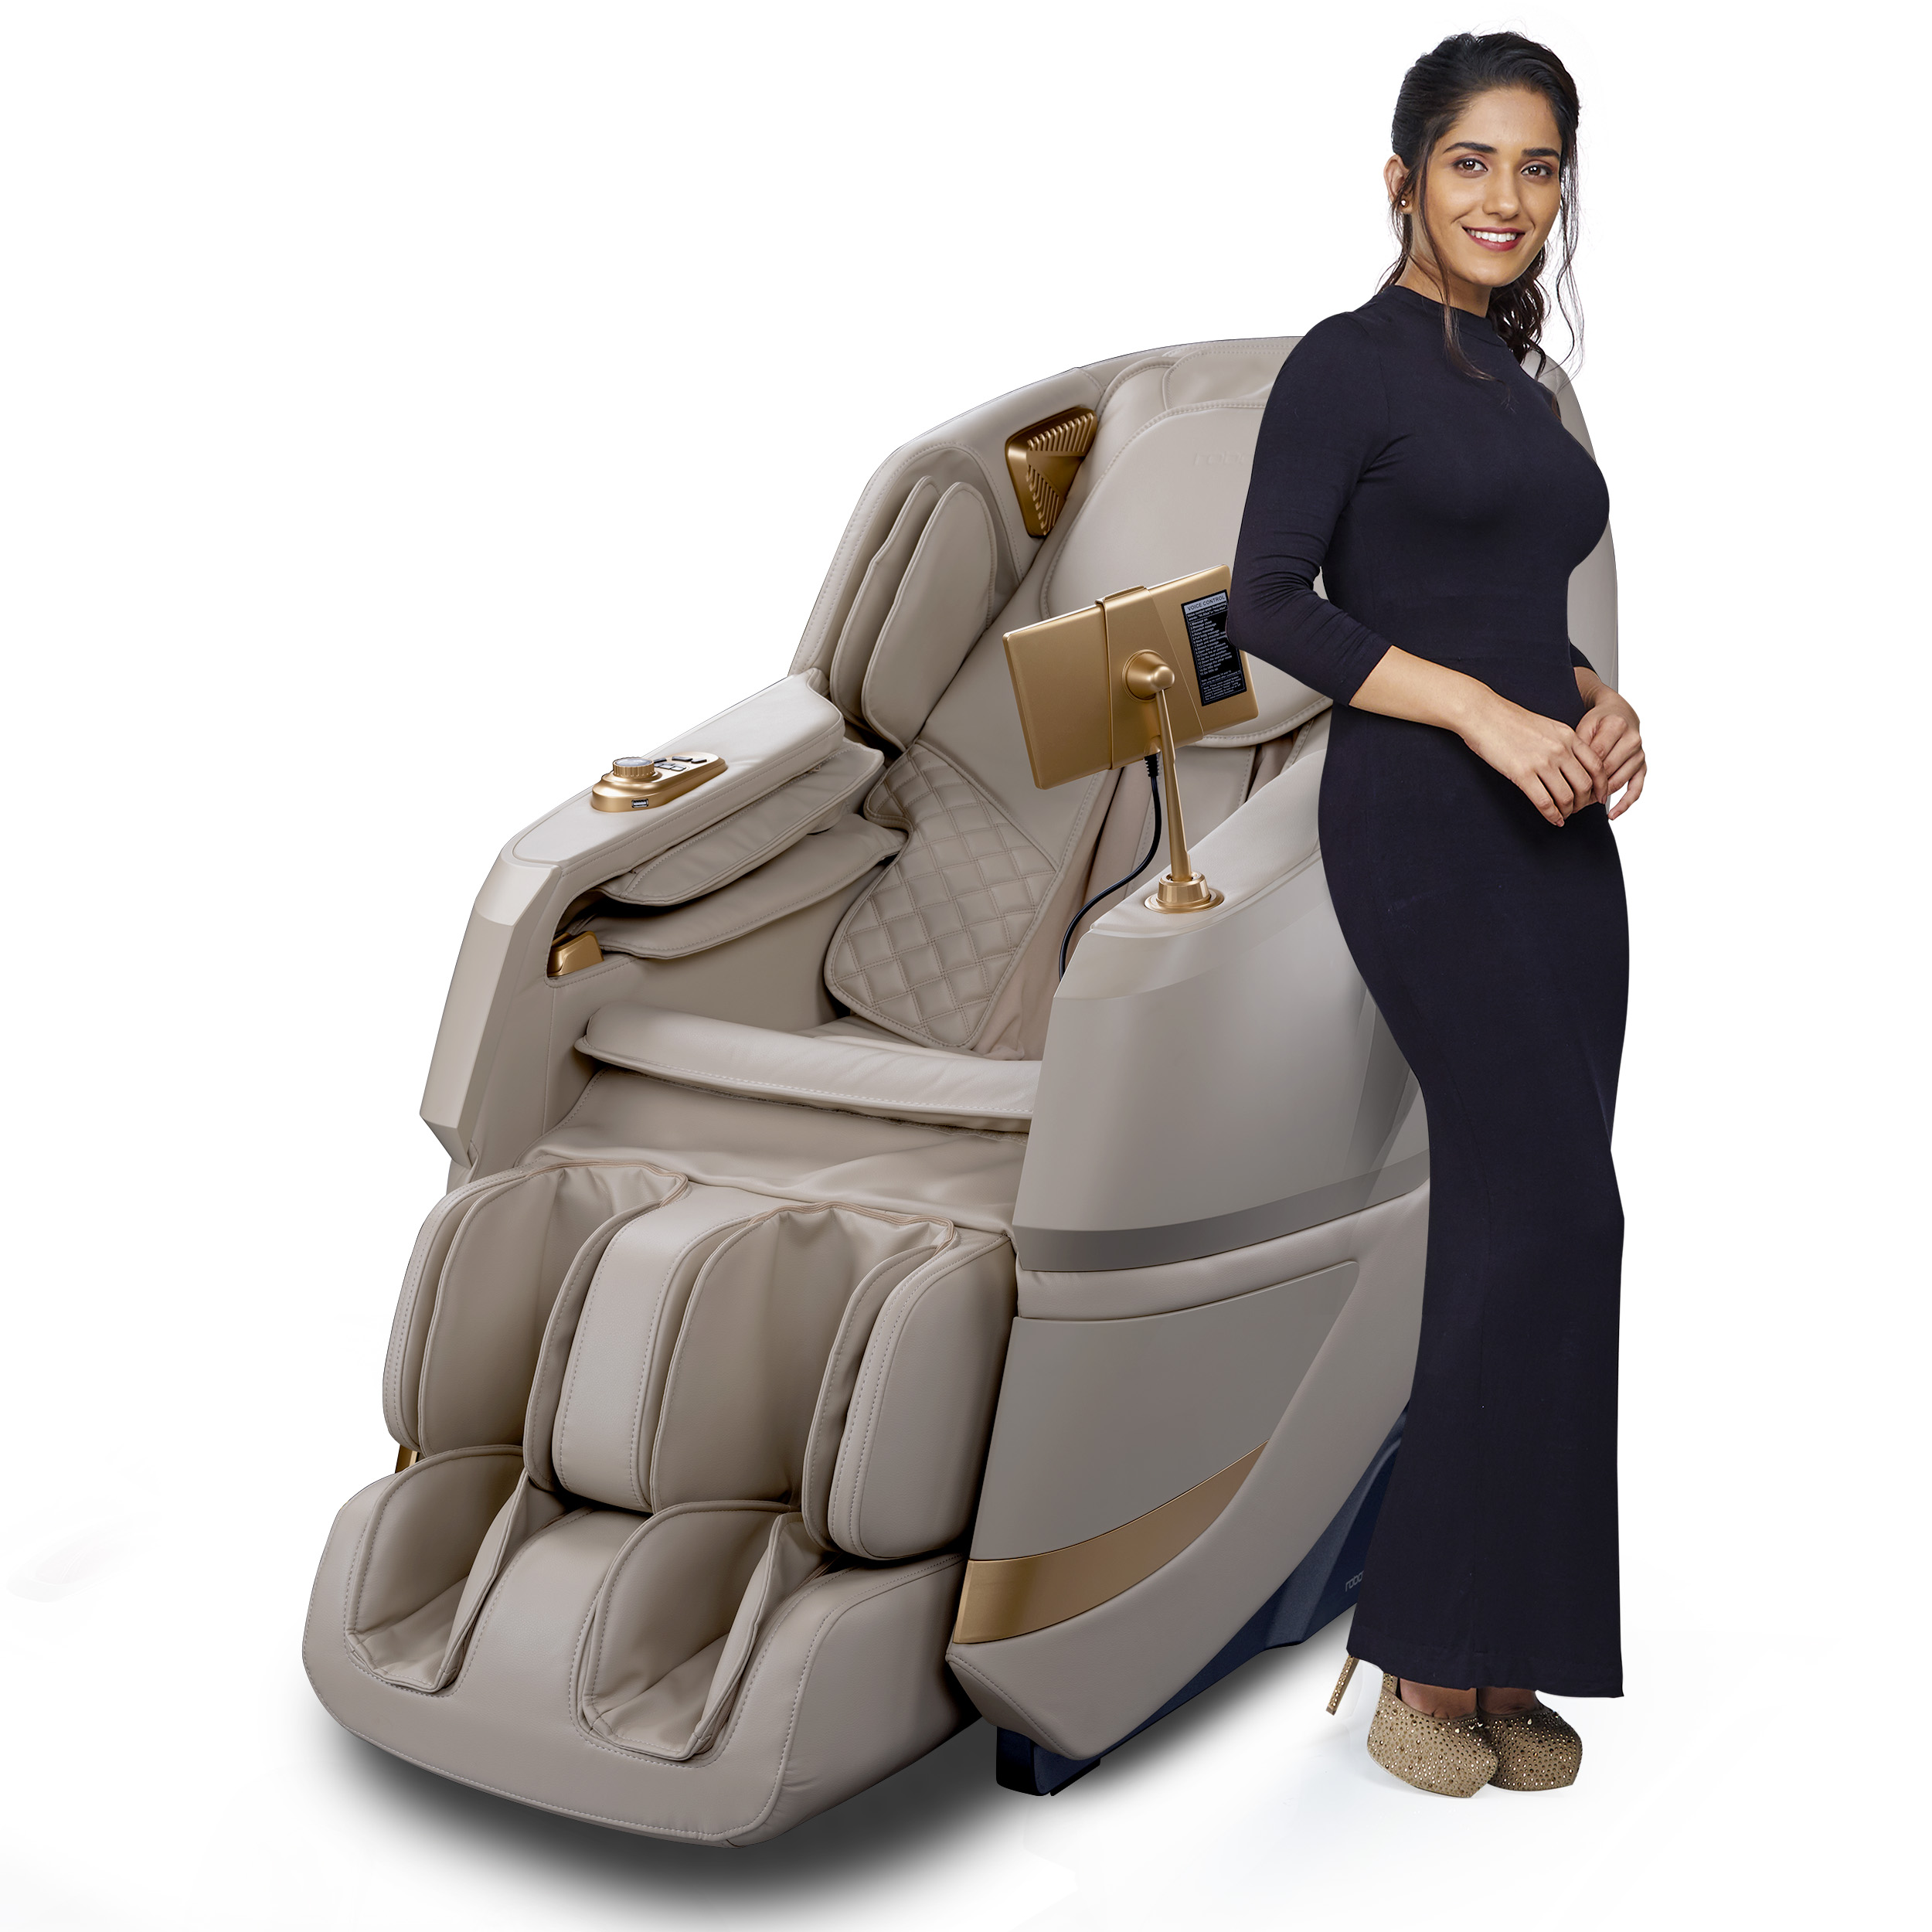 Full Body Massage Chair For sale